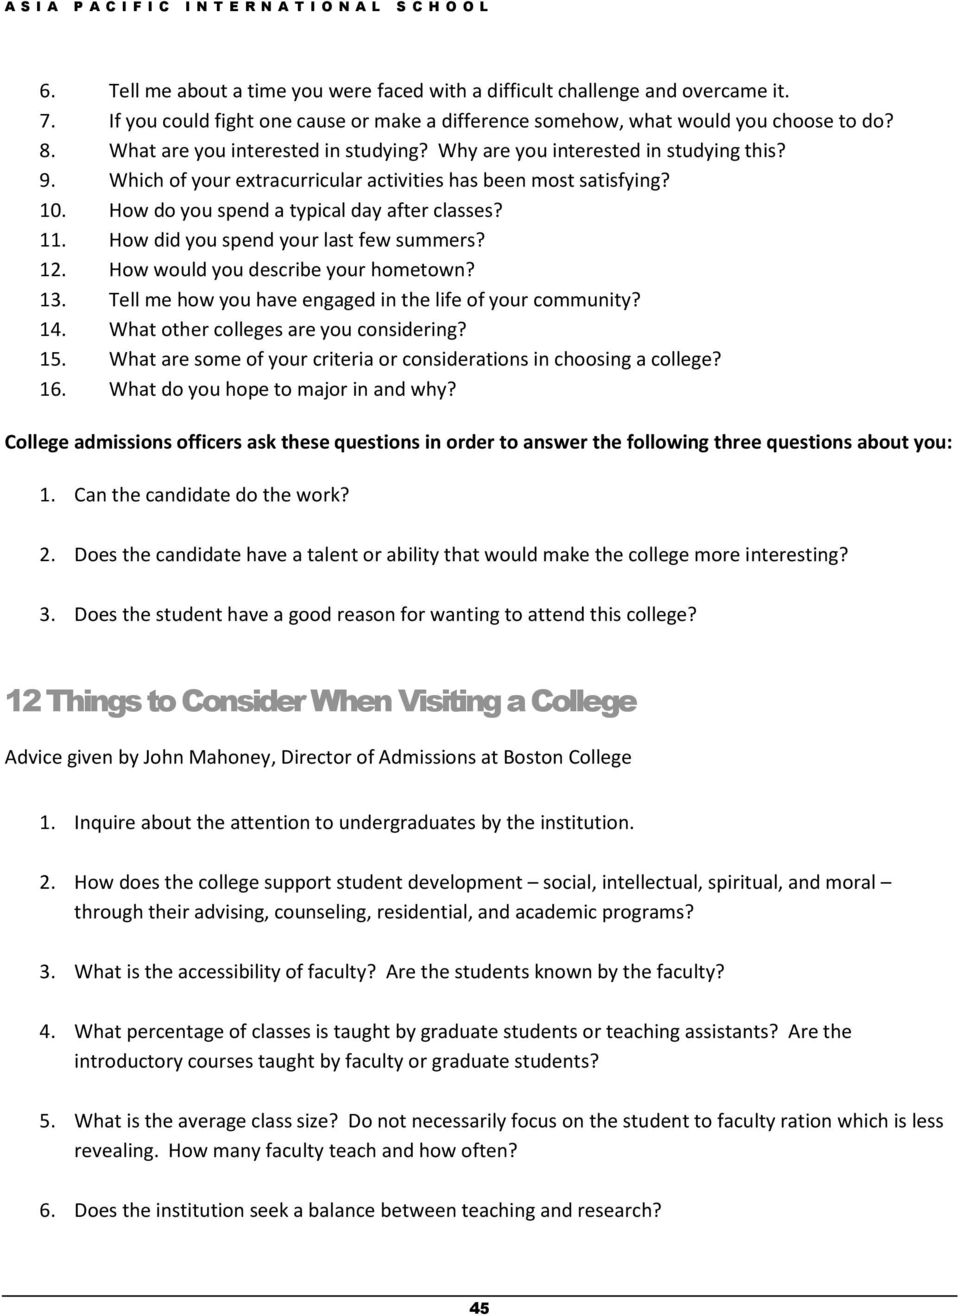 11. How did you spend your last few summers? 12. How would you describe your hometown? 13. Tell me how you have engaged in the life of your community? 14. What other colleges are you considering? 15.